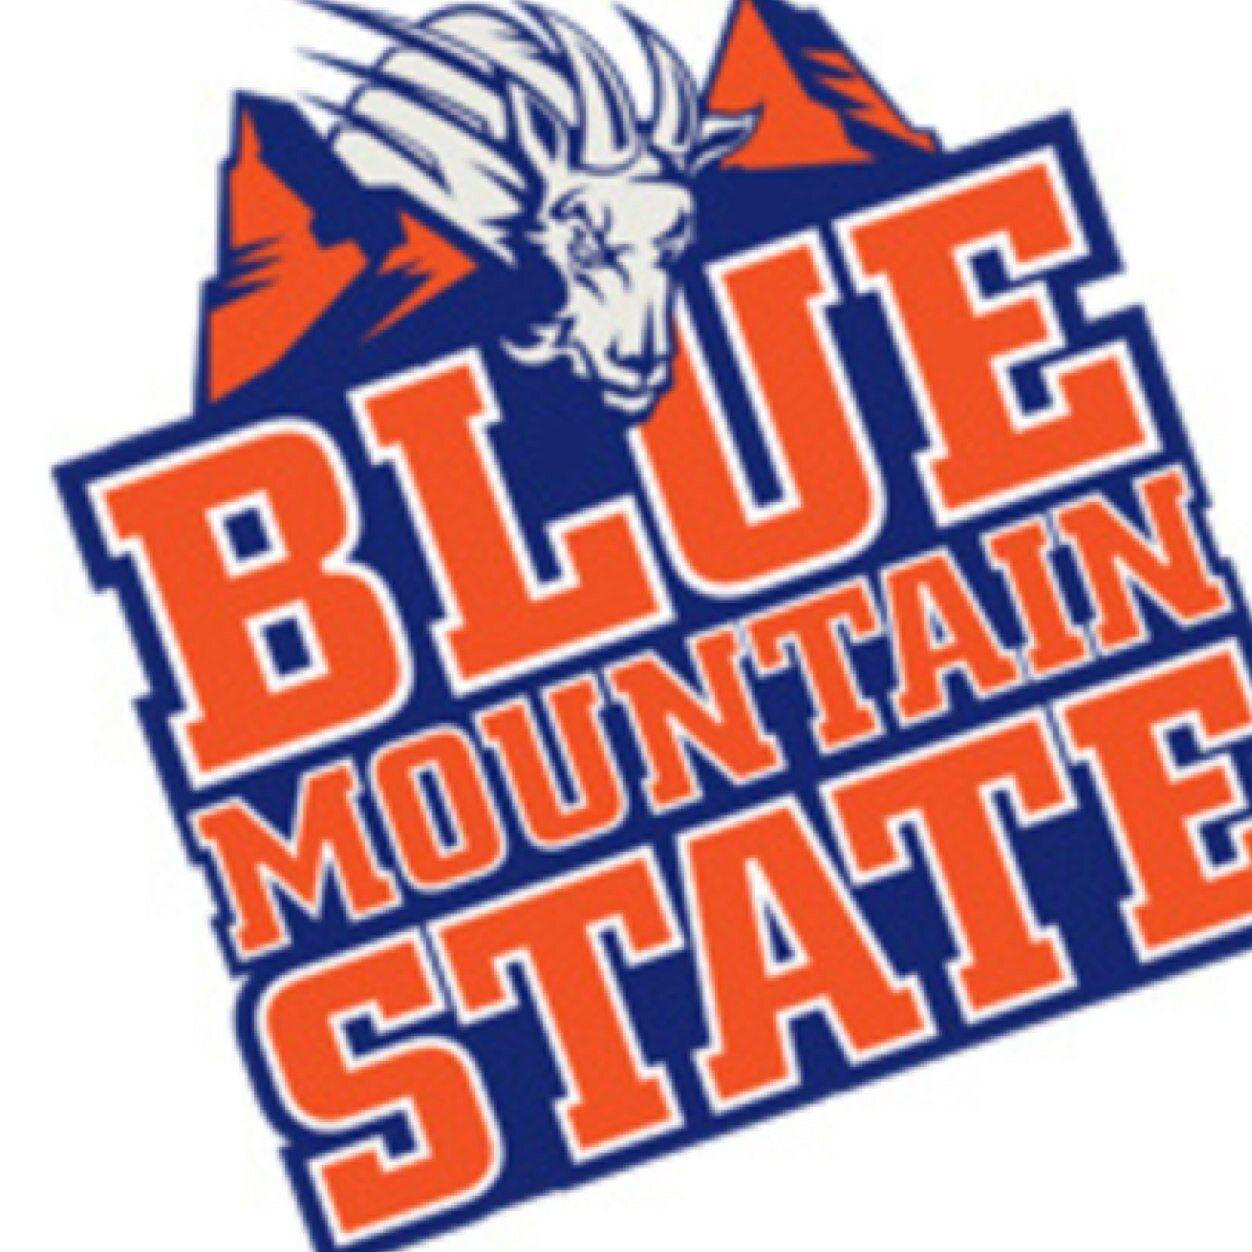 Blue Mountain State: Why I laughed